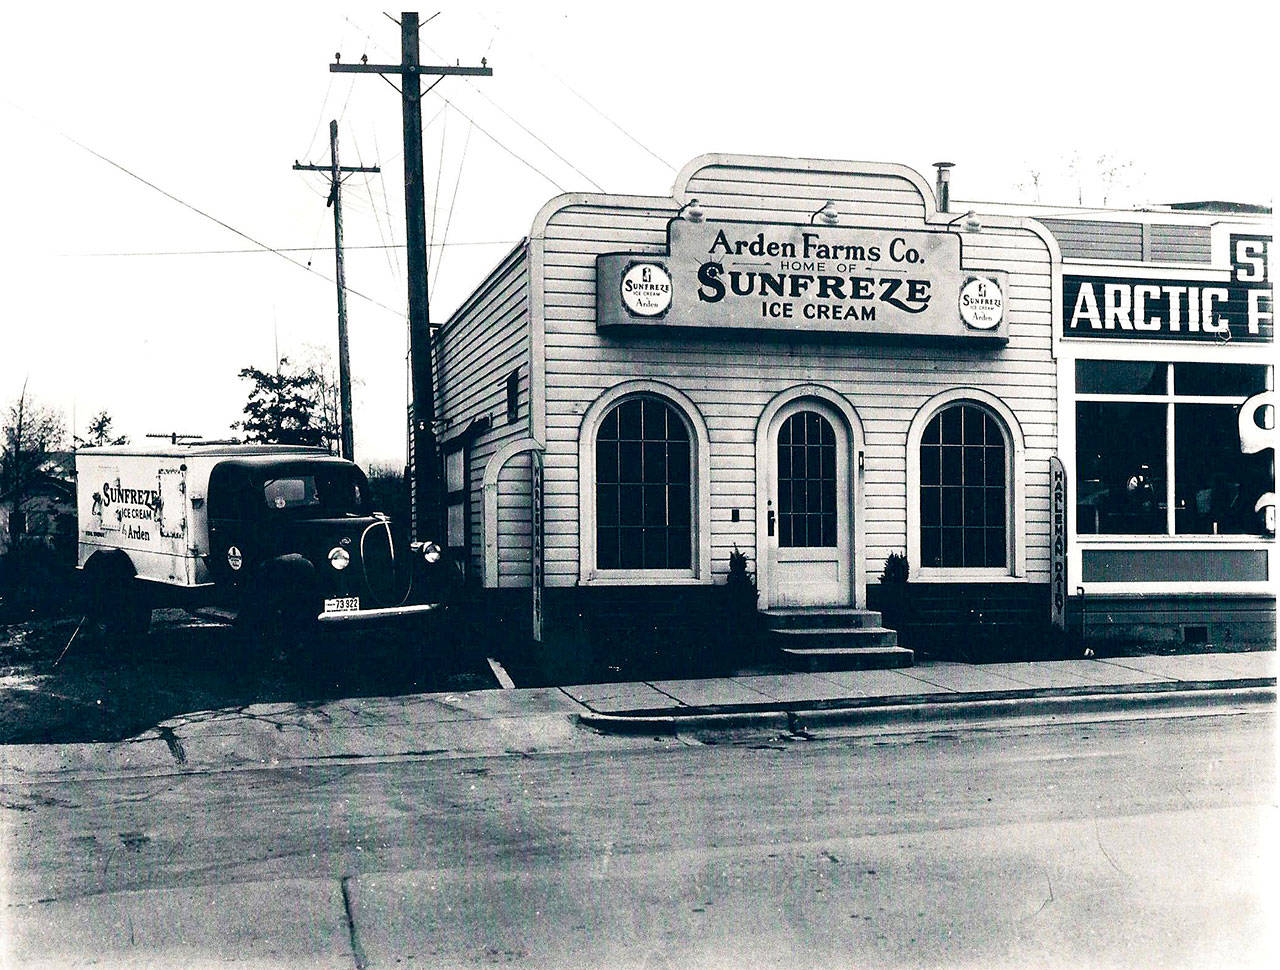 Picture from the past                                Do you recognize this Arden shop and do you know where it was? Send in your memories to bretches1942@gmail.com or write to Alice Alexander, 204 W. Fourth St. Apt. 14, Port Angeles, WA 98362 and she will include your comments in her June 4 column.